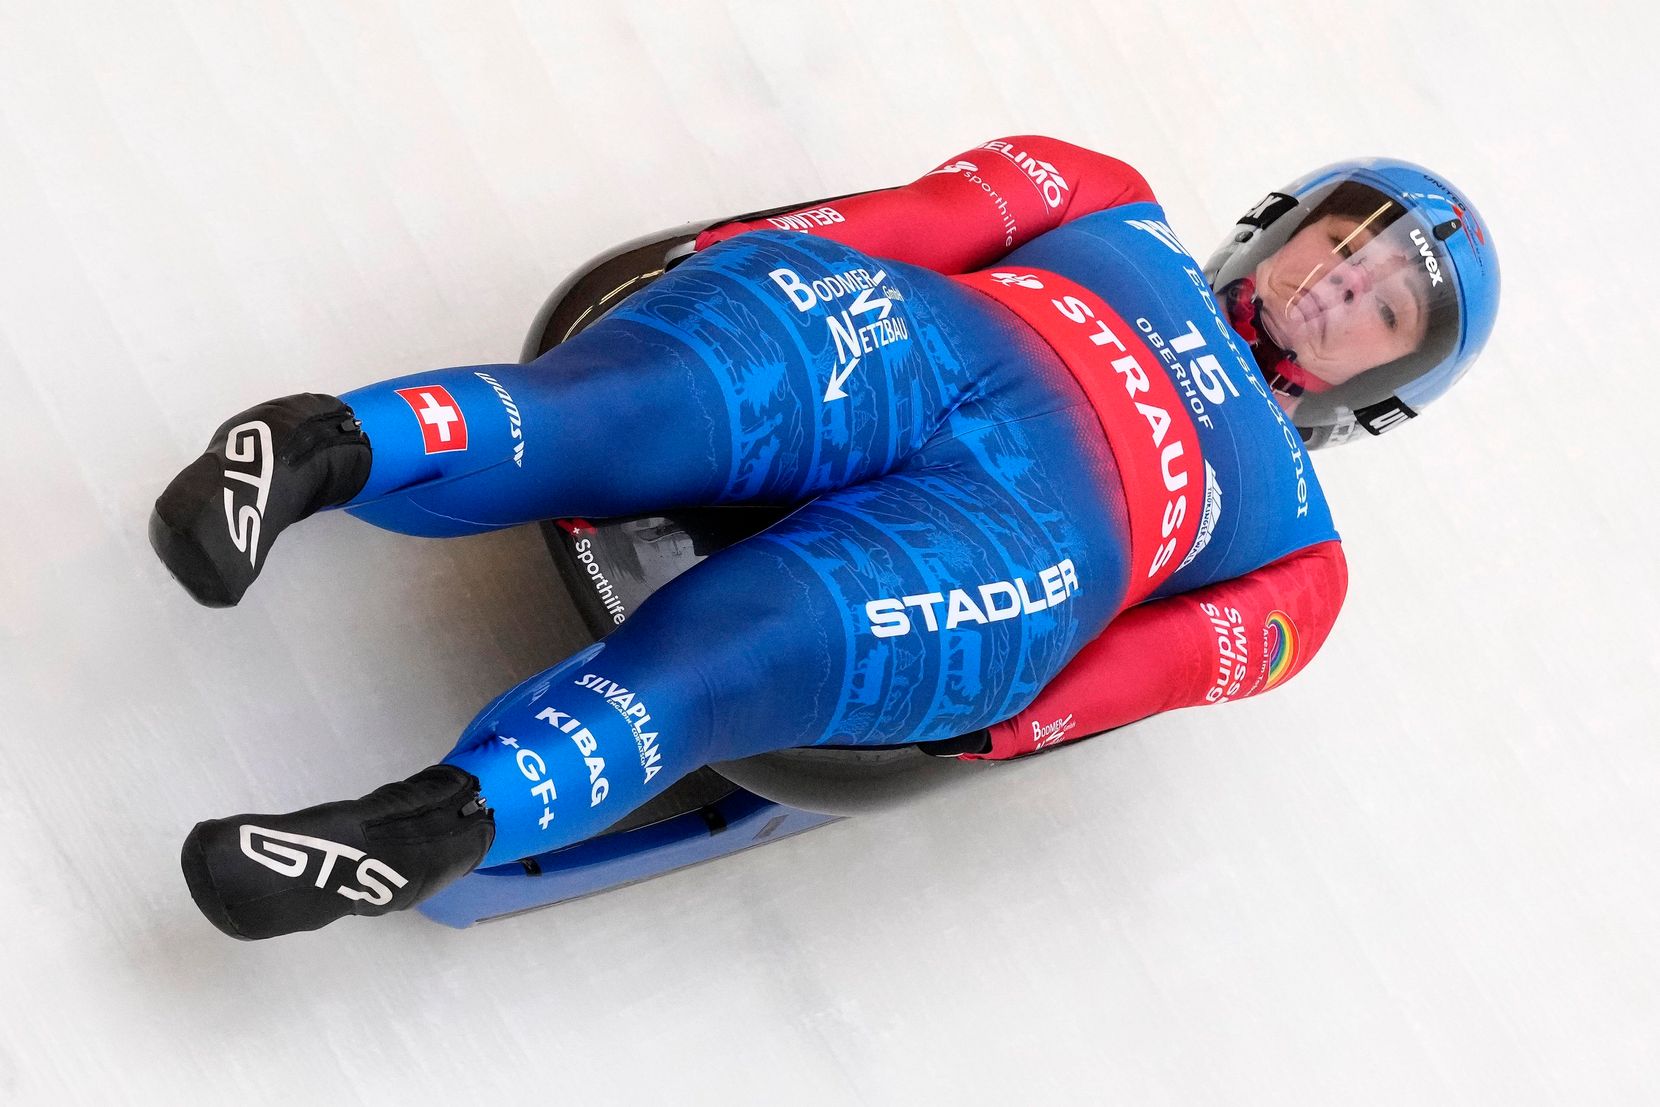 Natalie Maag of Switzerland speeds down the track during the women's singles race at the Luge World Championships in Oberhof, Germany, Saturday, Jan. 28, 2023. (AP Photo/Matthias Schrader)